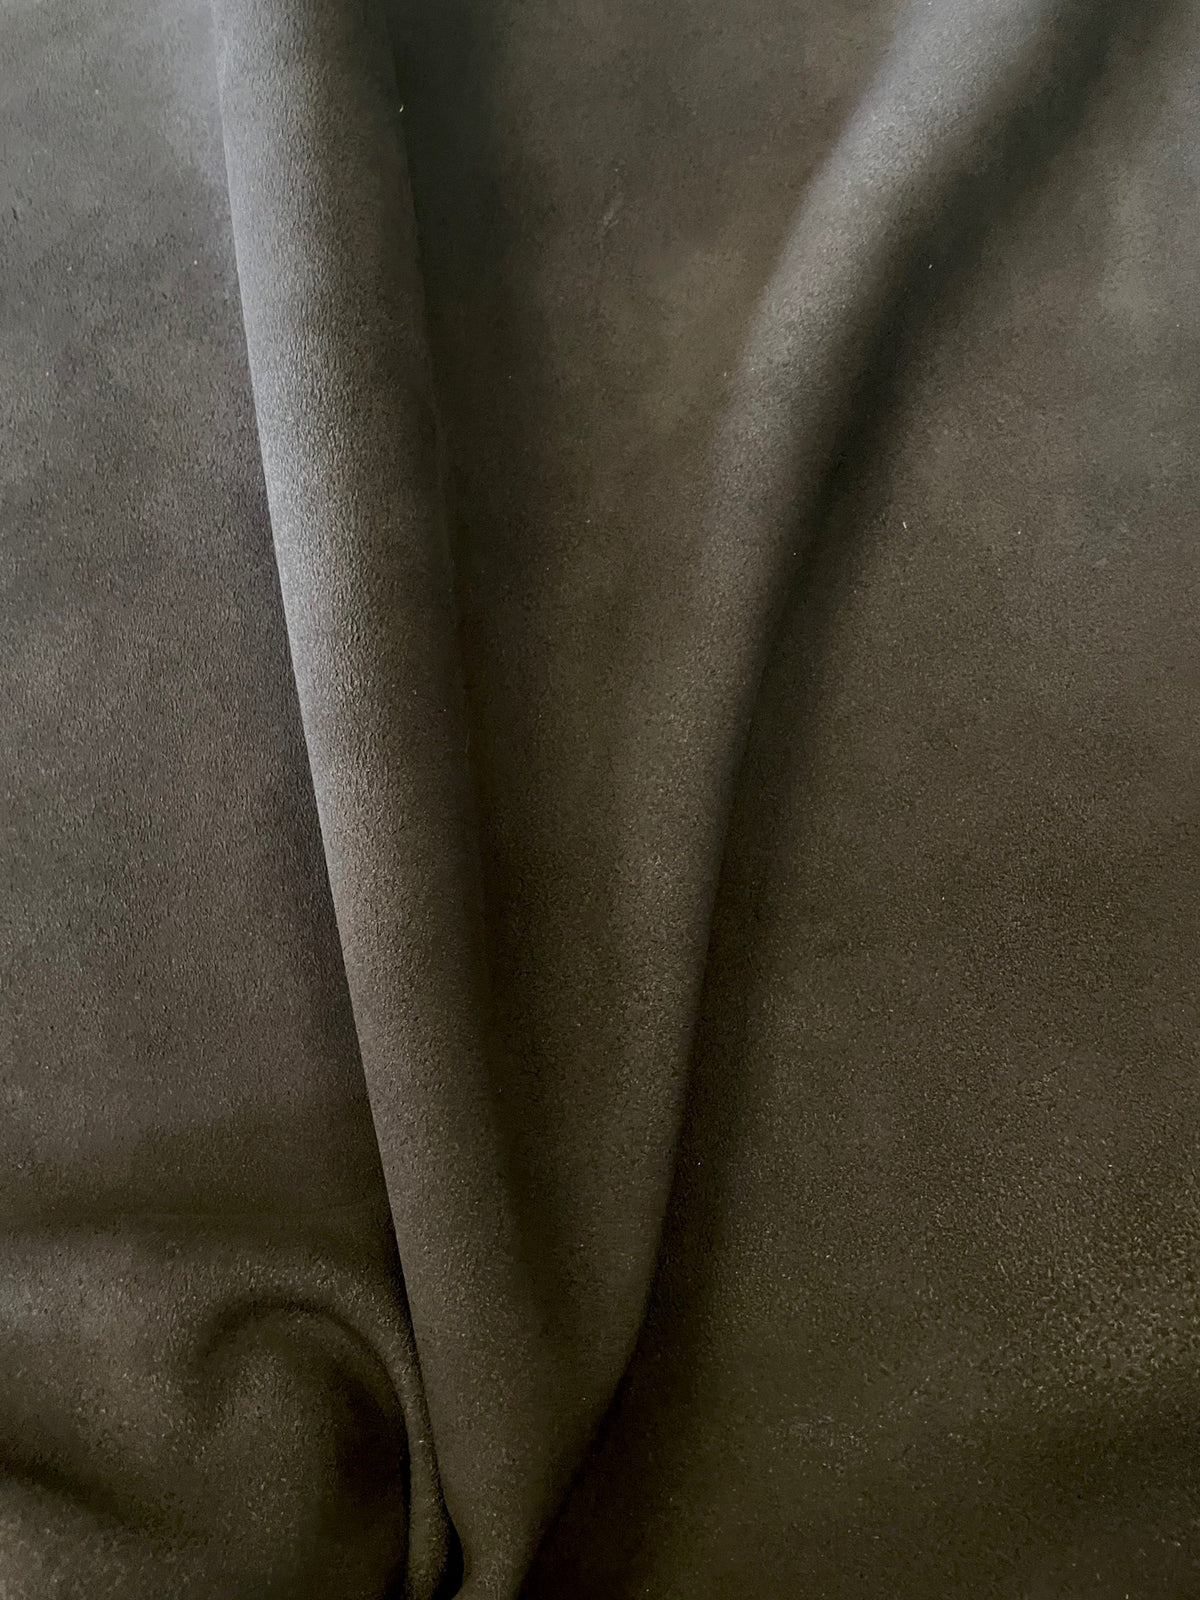 Suede Black Classic Cow Side | 1.9mm | 9 sq.ft | $40 ea.